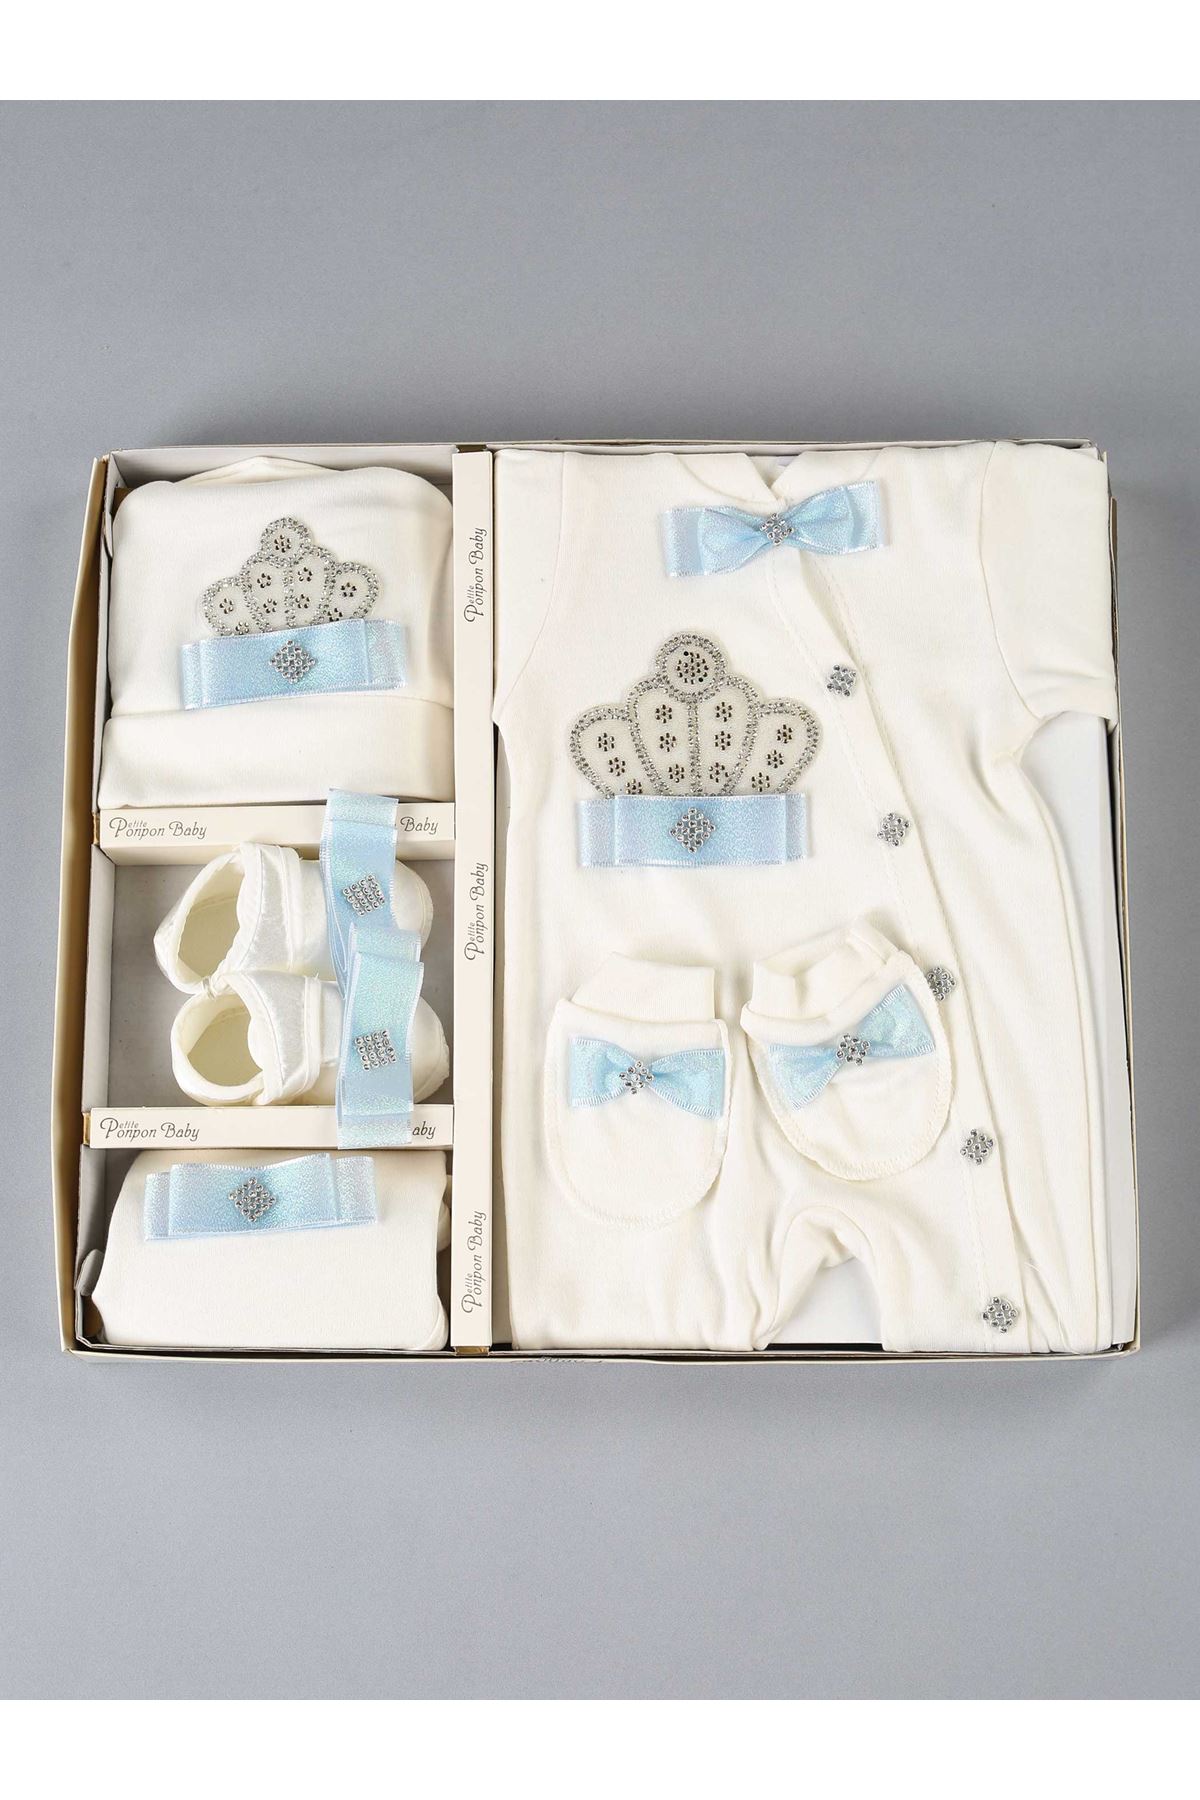 Blue King Crowned Male Baby 5 Piece Jumpsuit Set